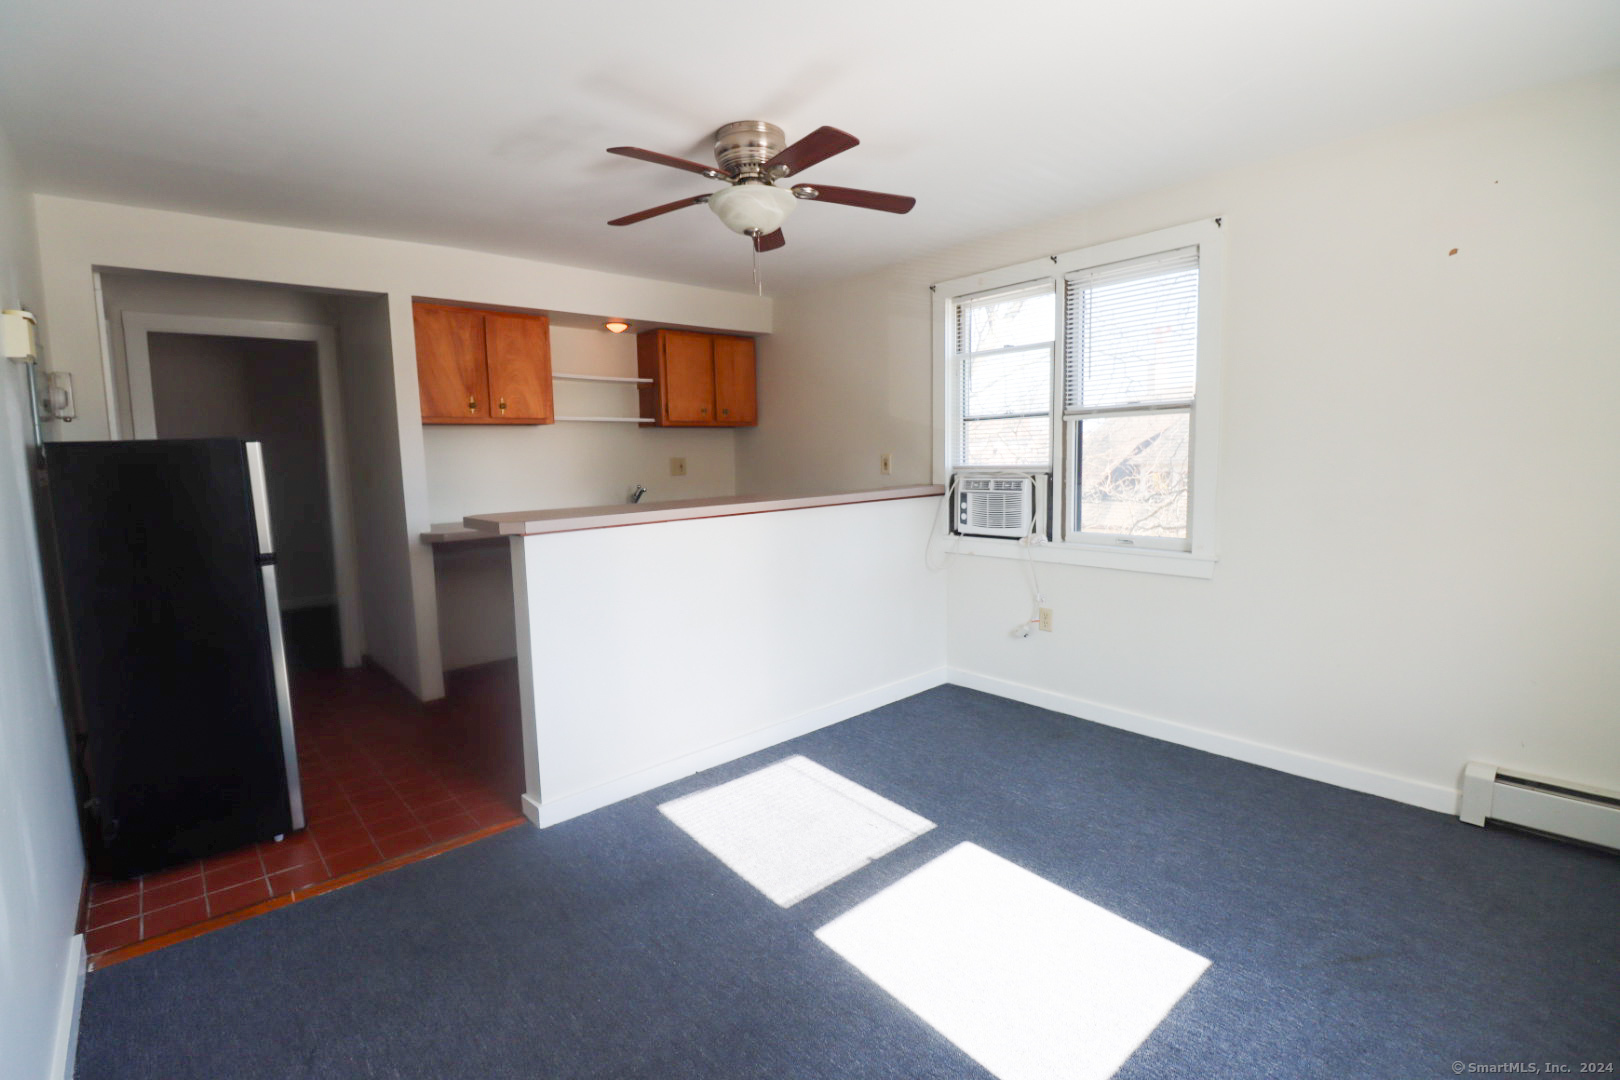 51 Franklin Street 2, New London, Connecticut - 1 Bedrooms  
1 Bathrooms  
3 Rooms - 